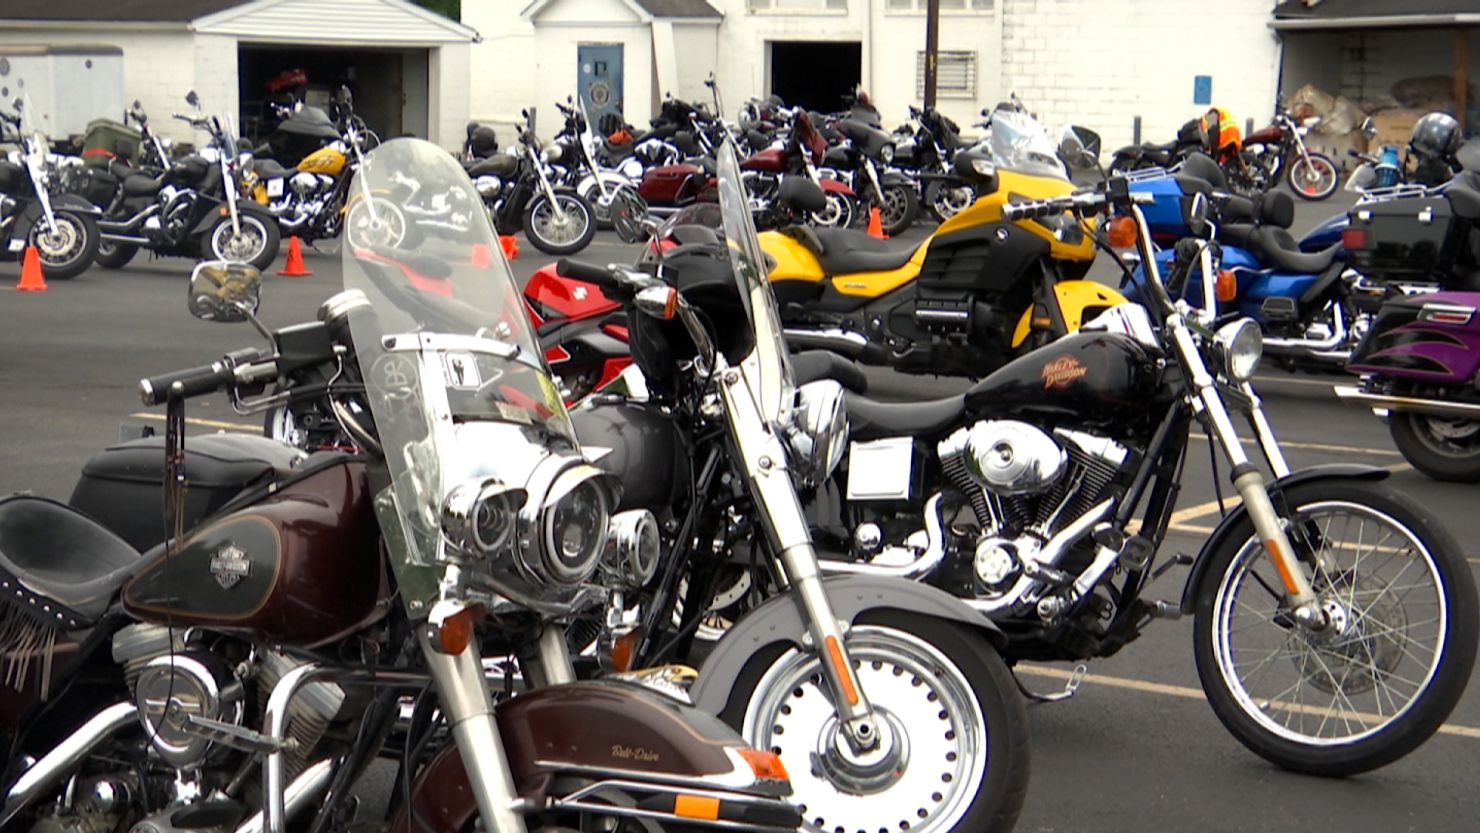 The Helping Heroes Freedom Ride in Indiana supports service members and veterans.